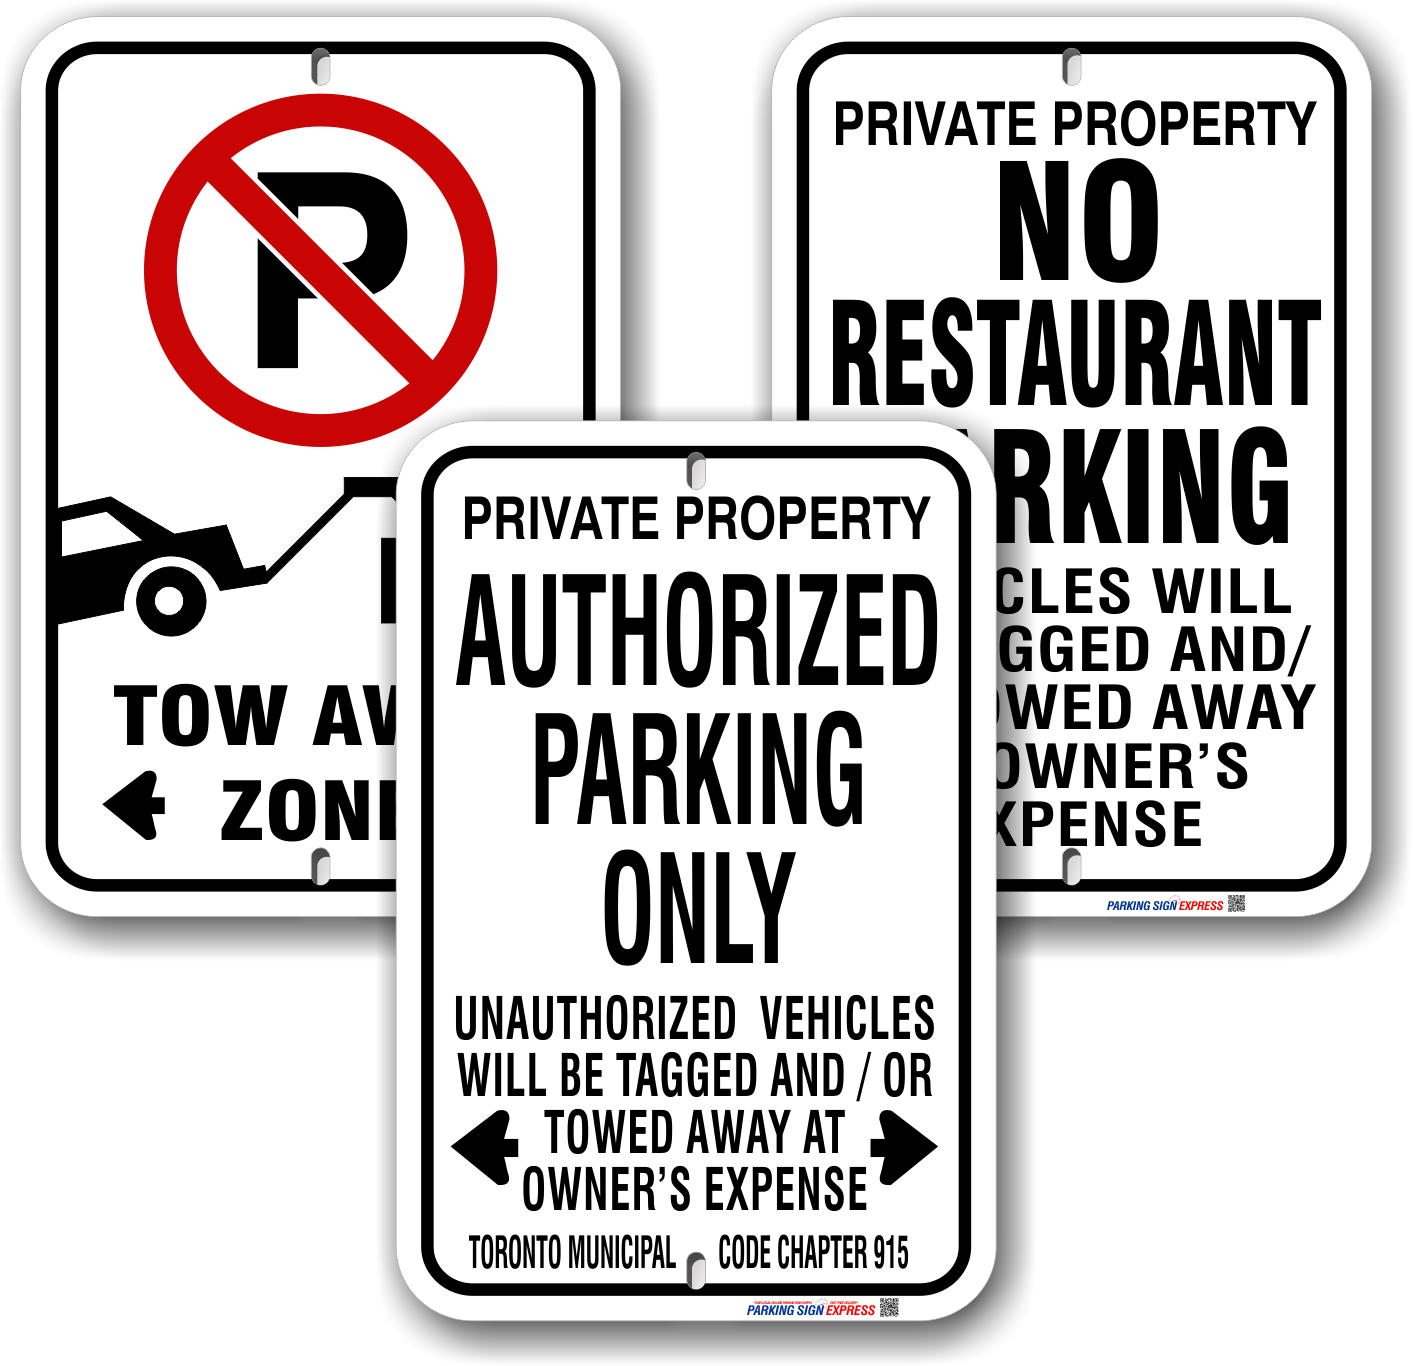 No Parking and Authorized Parking Only parking signs